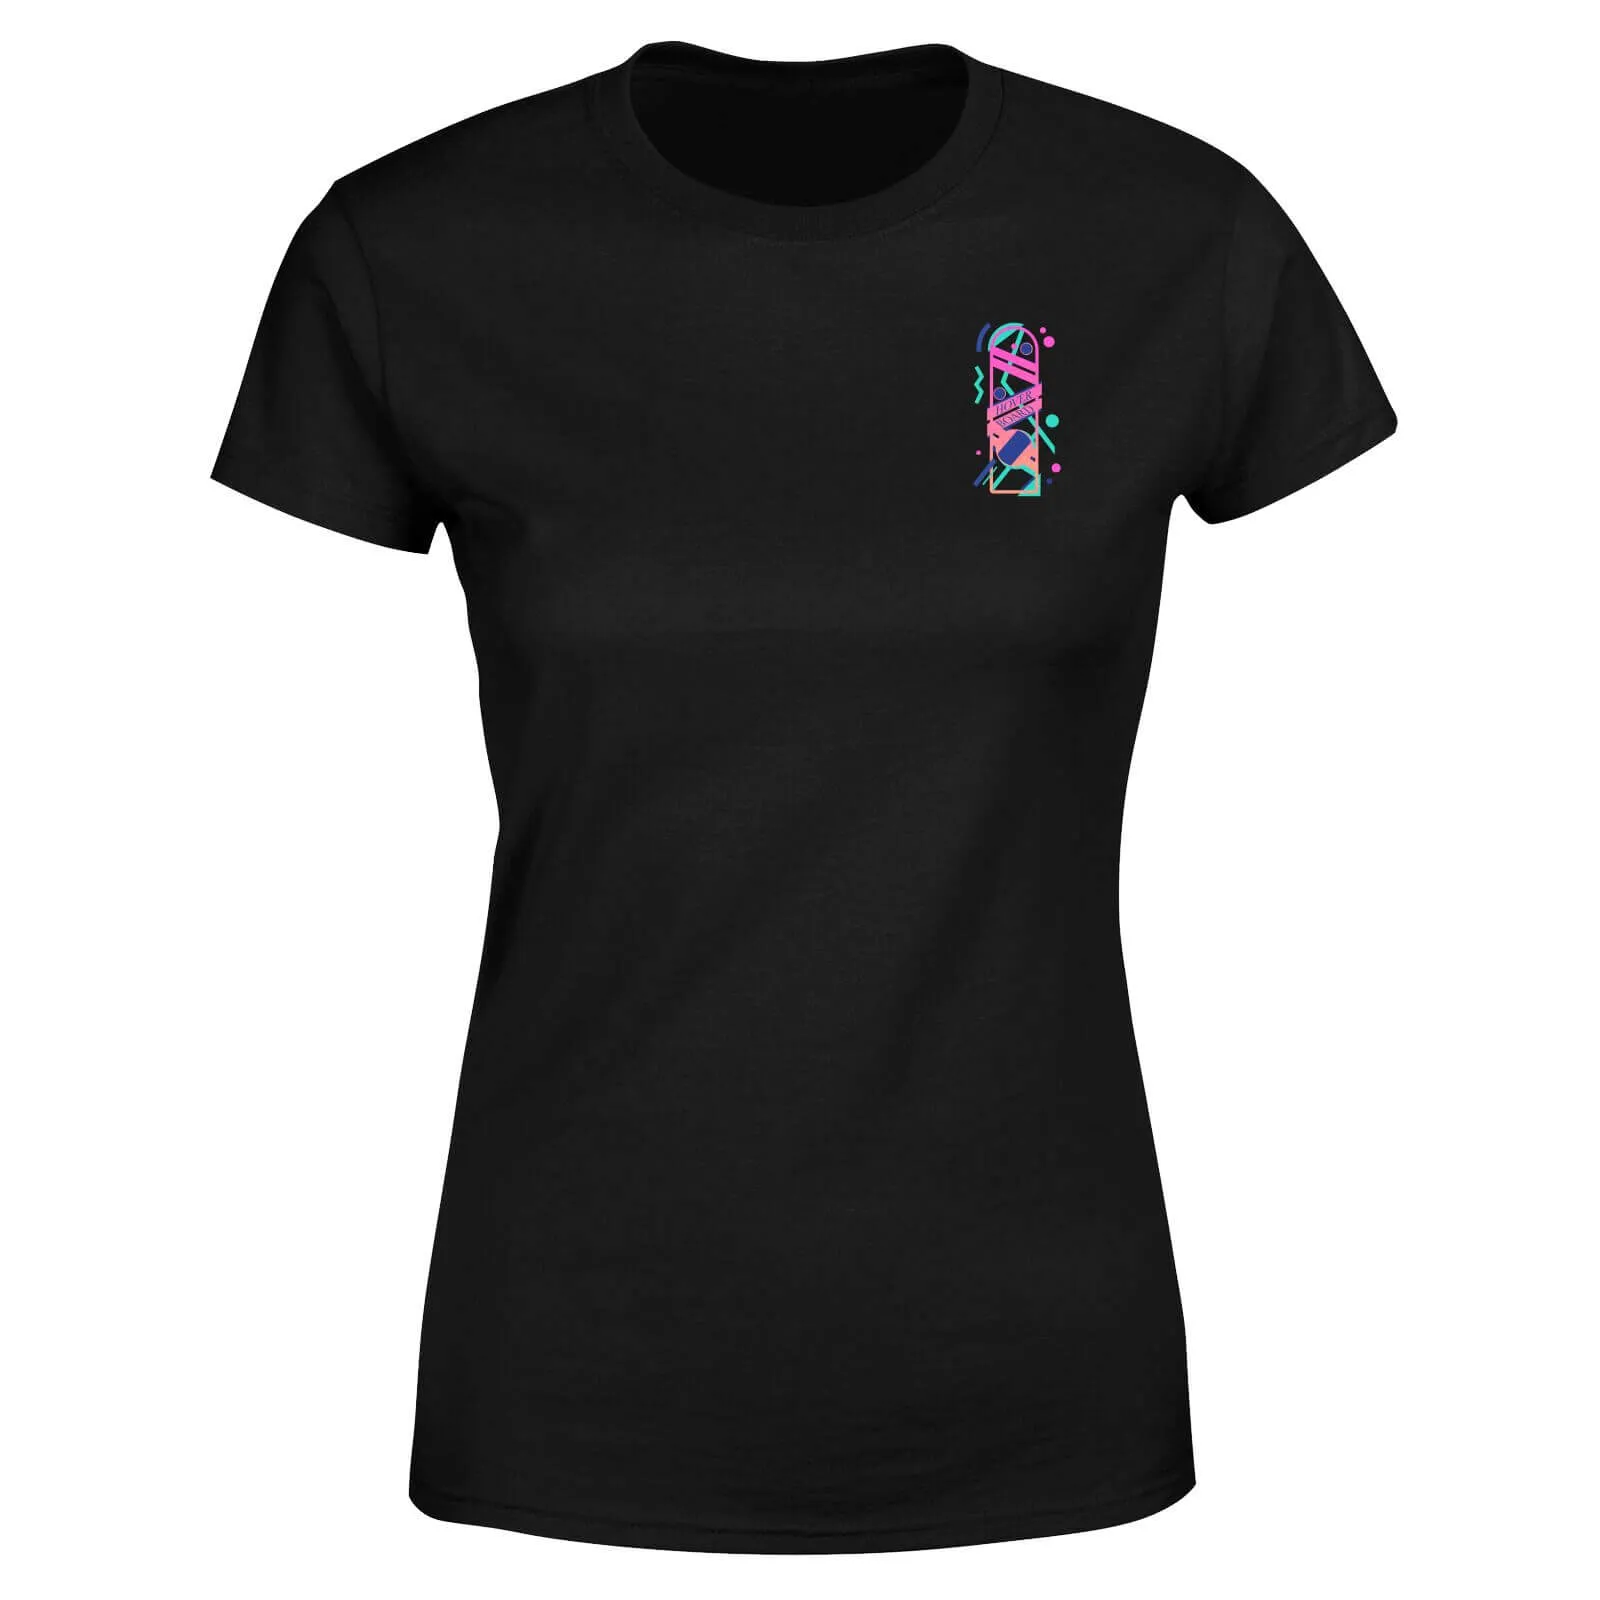 Back To The Future Hover Board Women's T-Shirt - Black - S